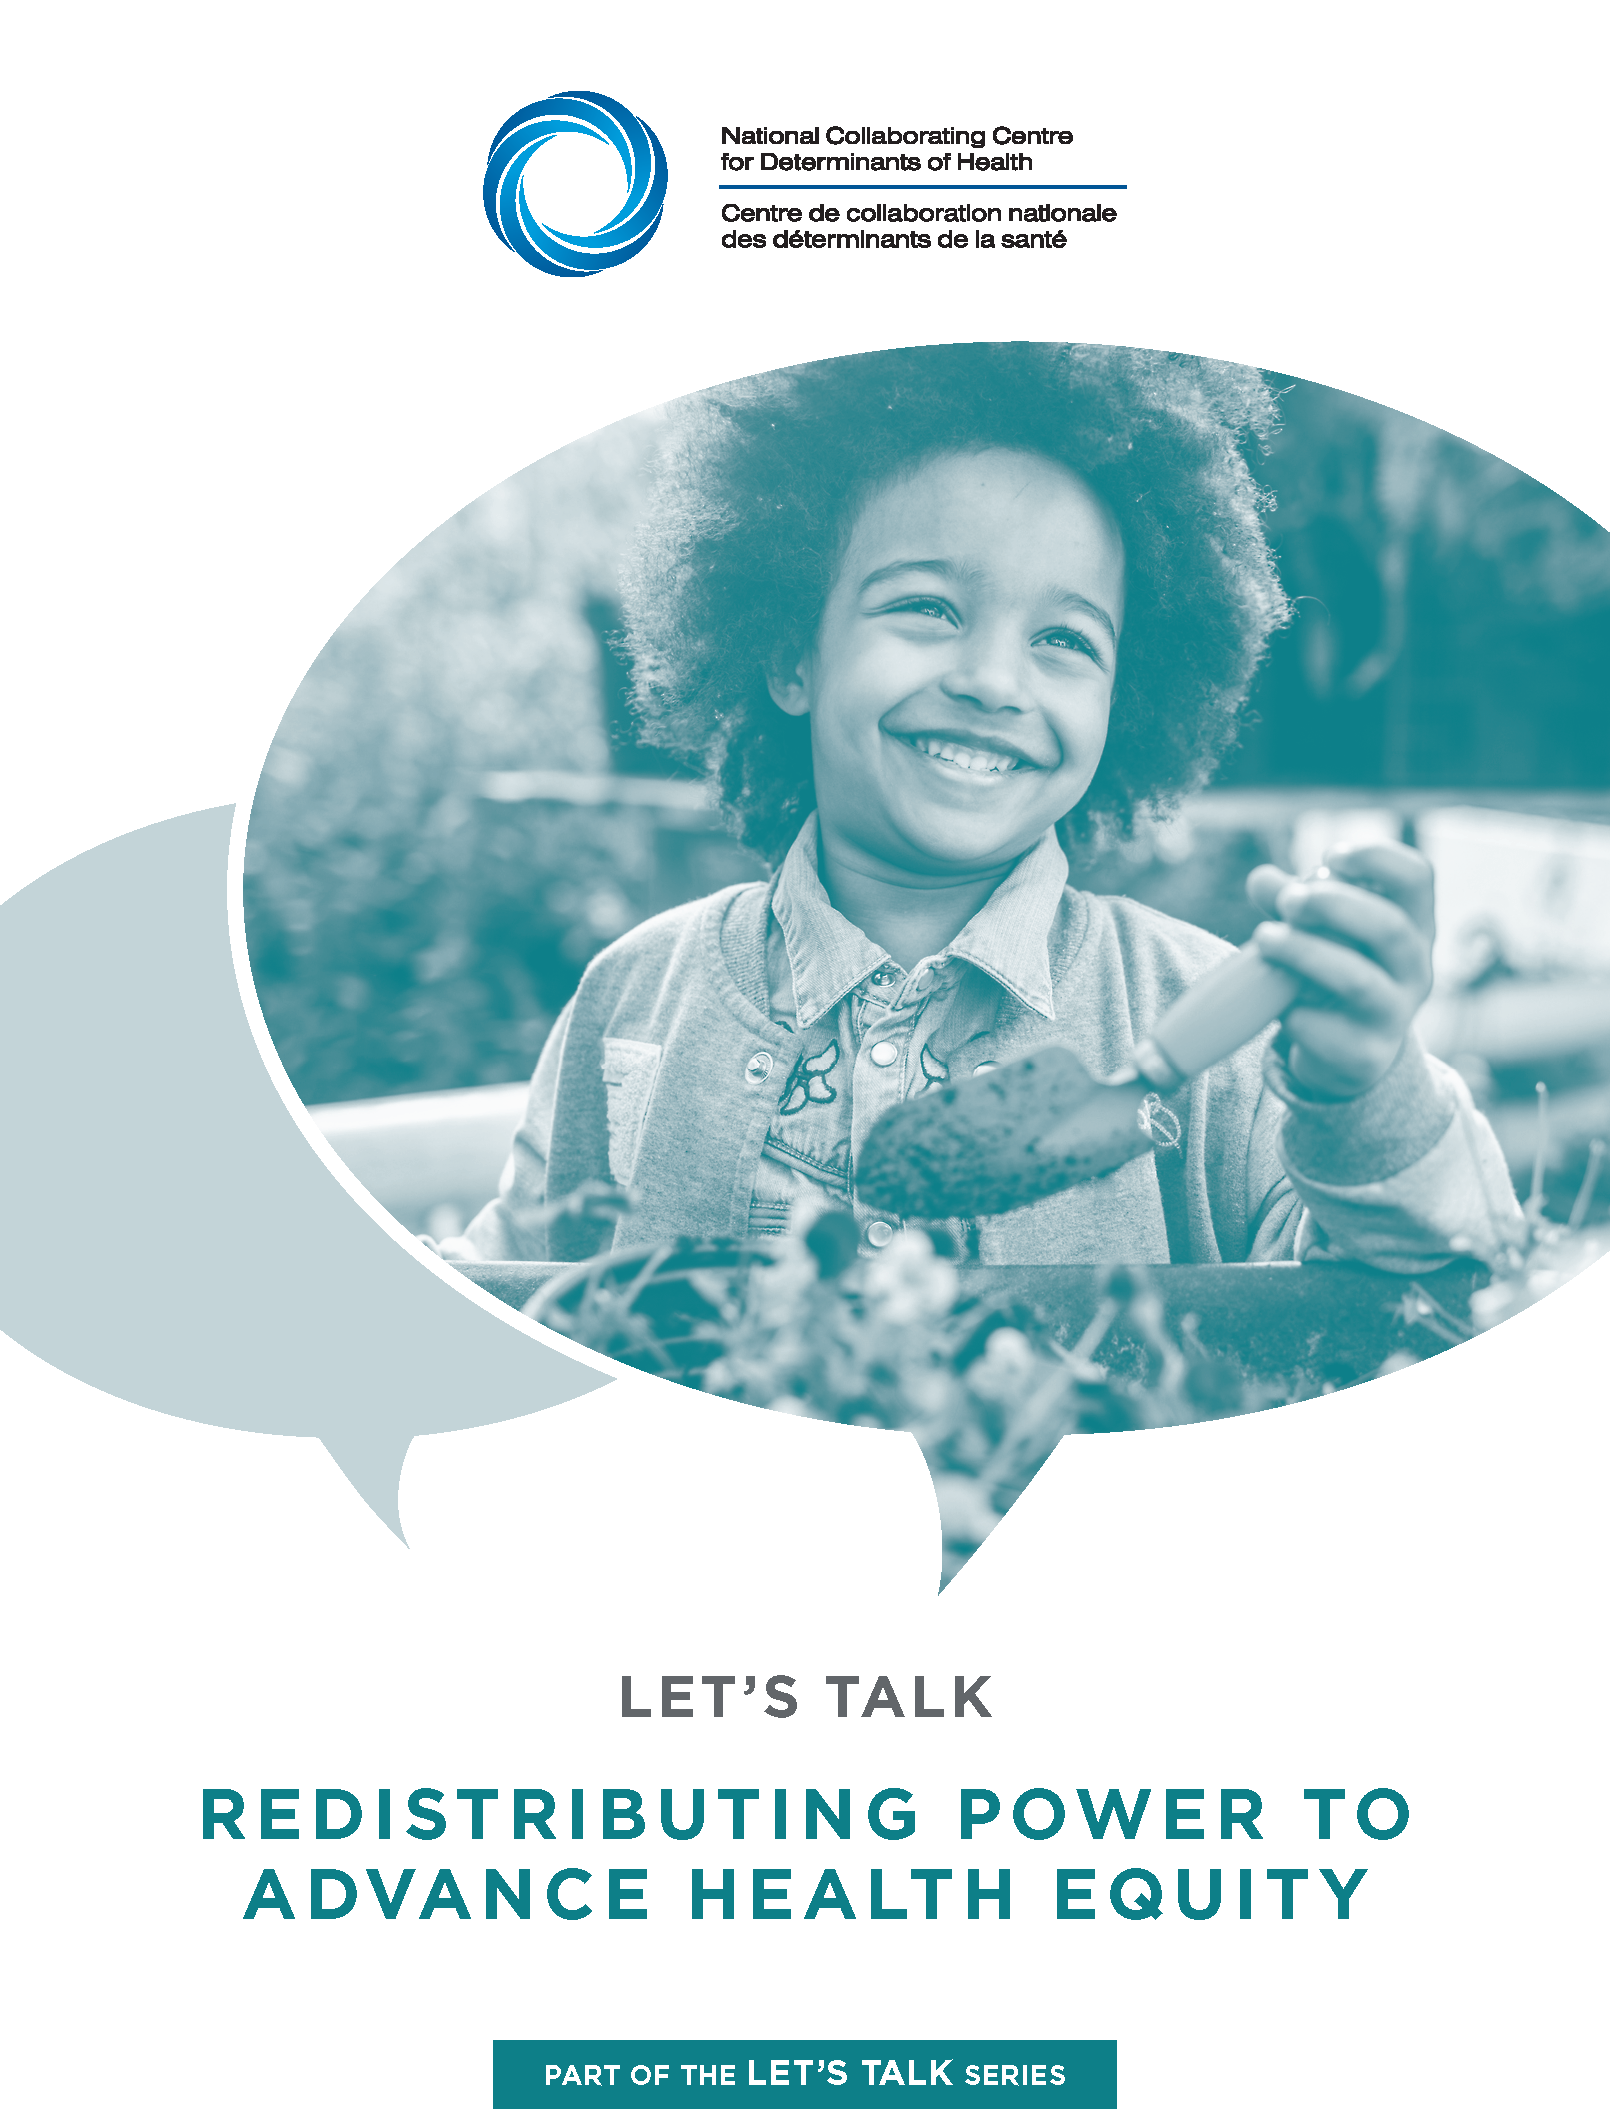 Let’s Talk: Redistributing power to advance health equity